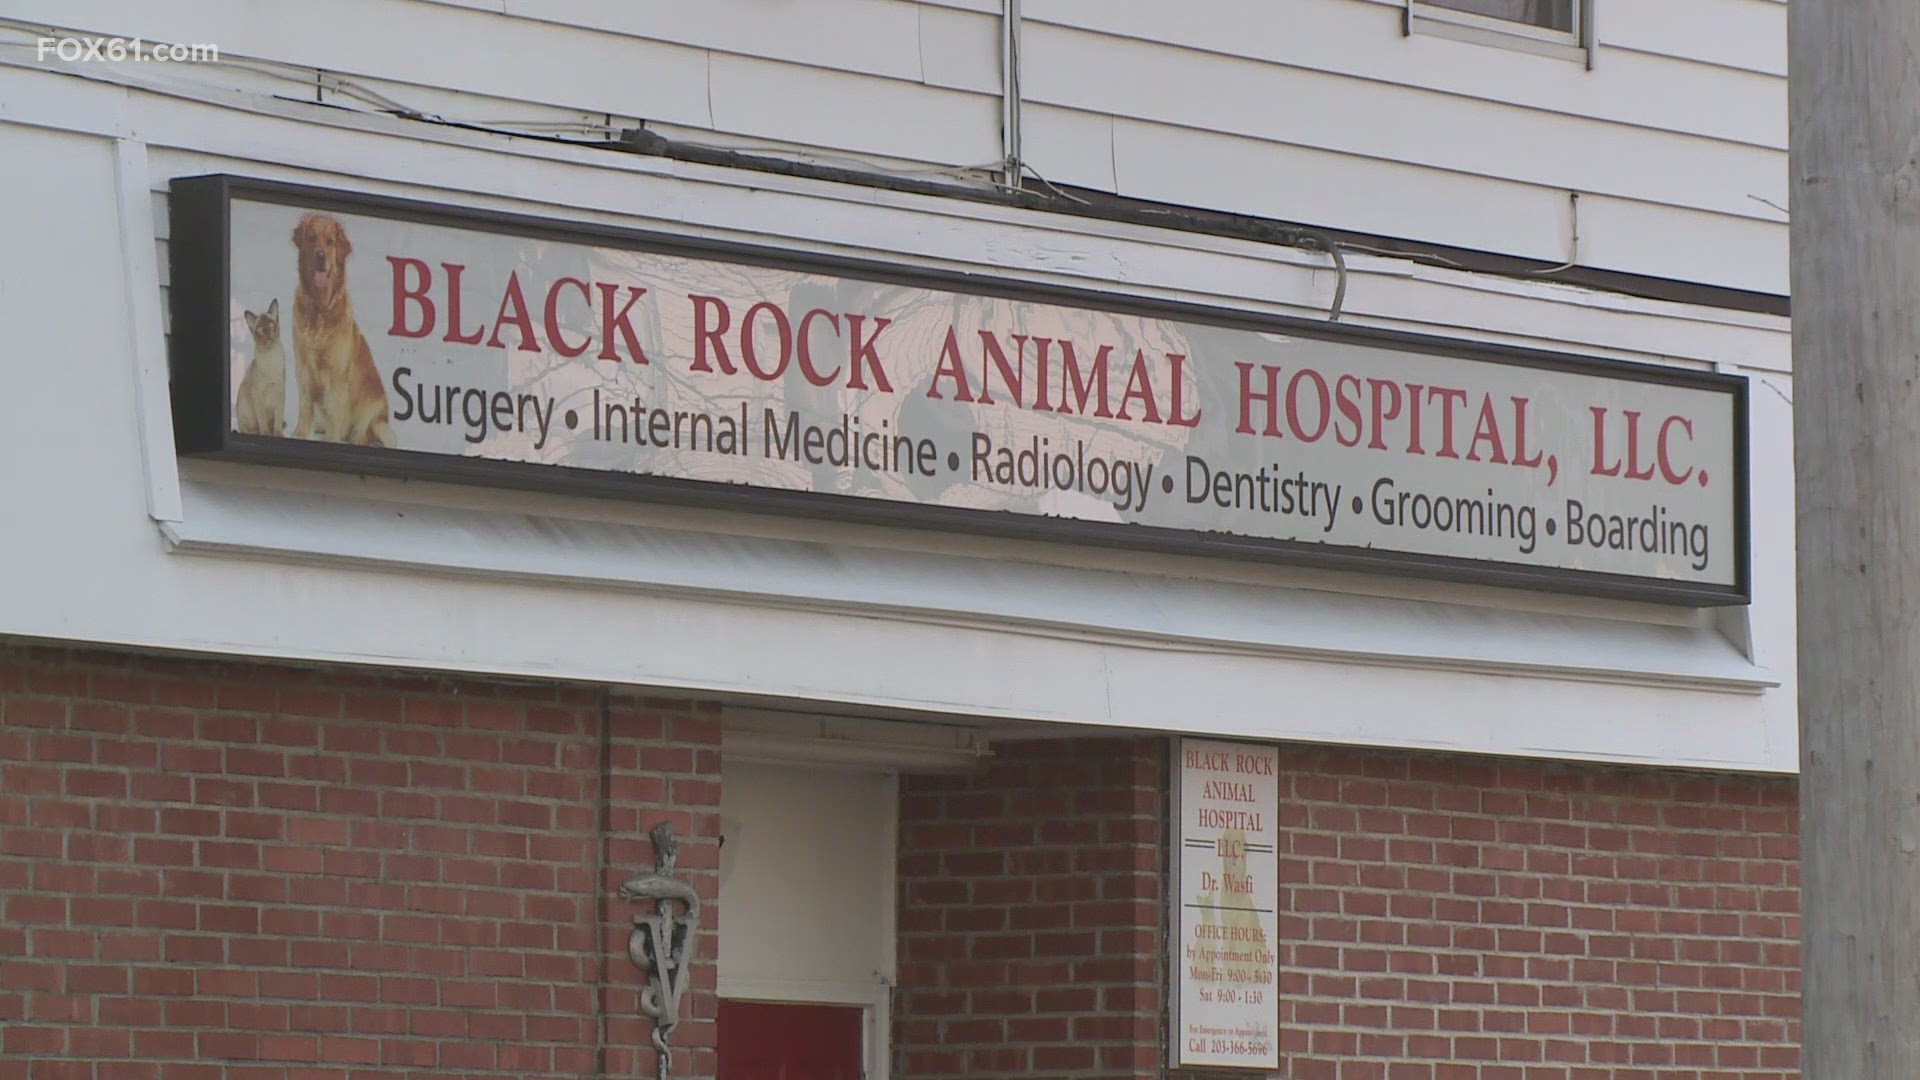 An investigation determined the dog died of overheating due to the Dr. Amr Wasfi, the owner of Black Rock, leaving the dog on a heating pad for an extended period.